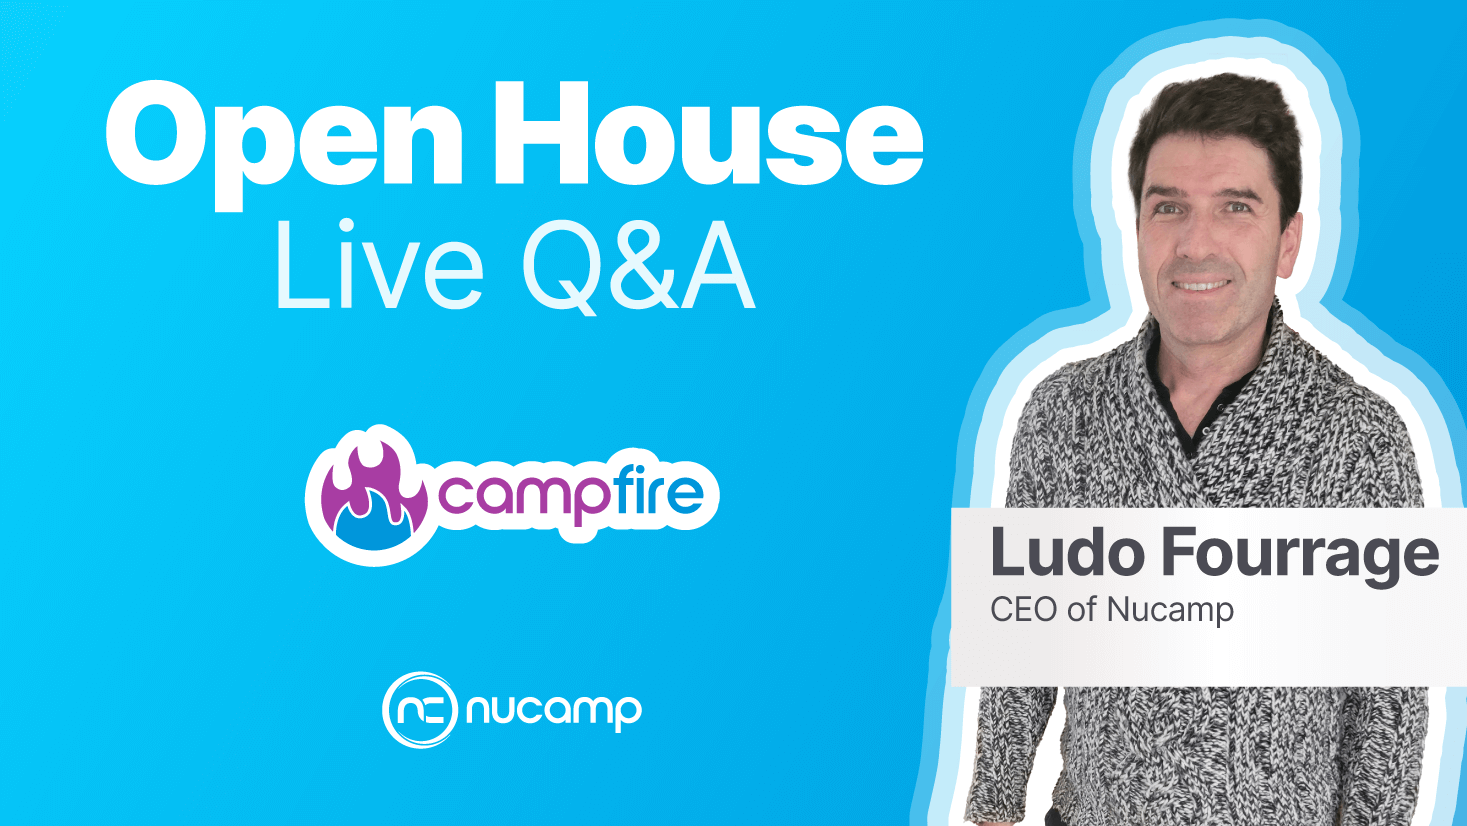 Nucamp coding bootcamp CEO live Q&A